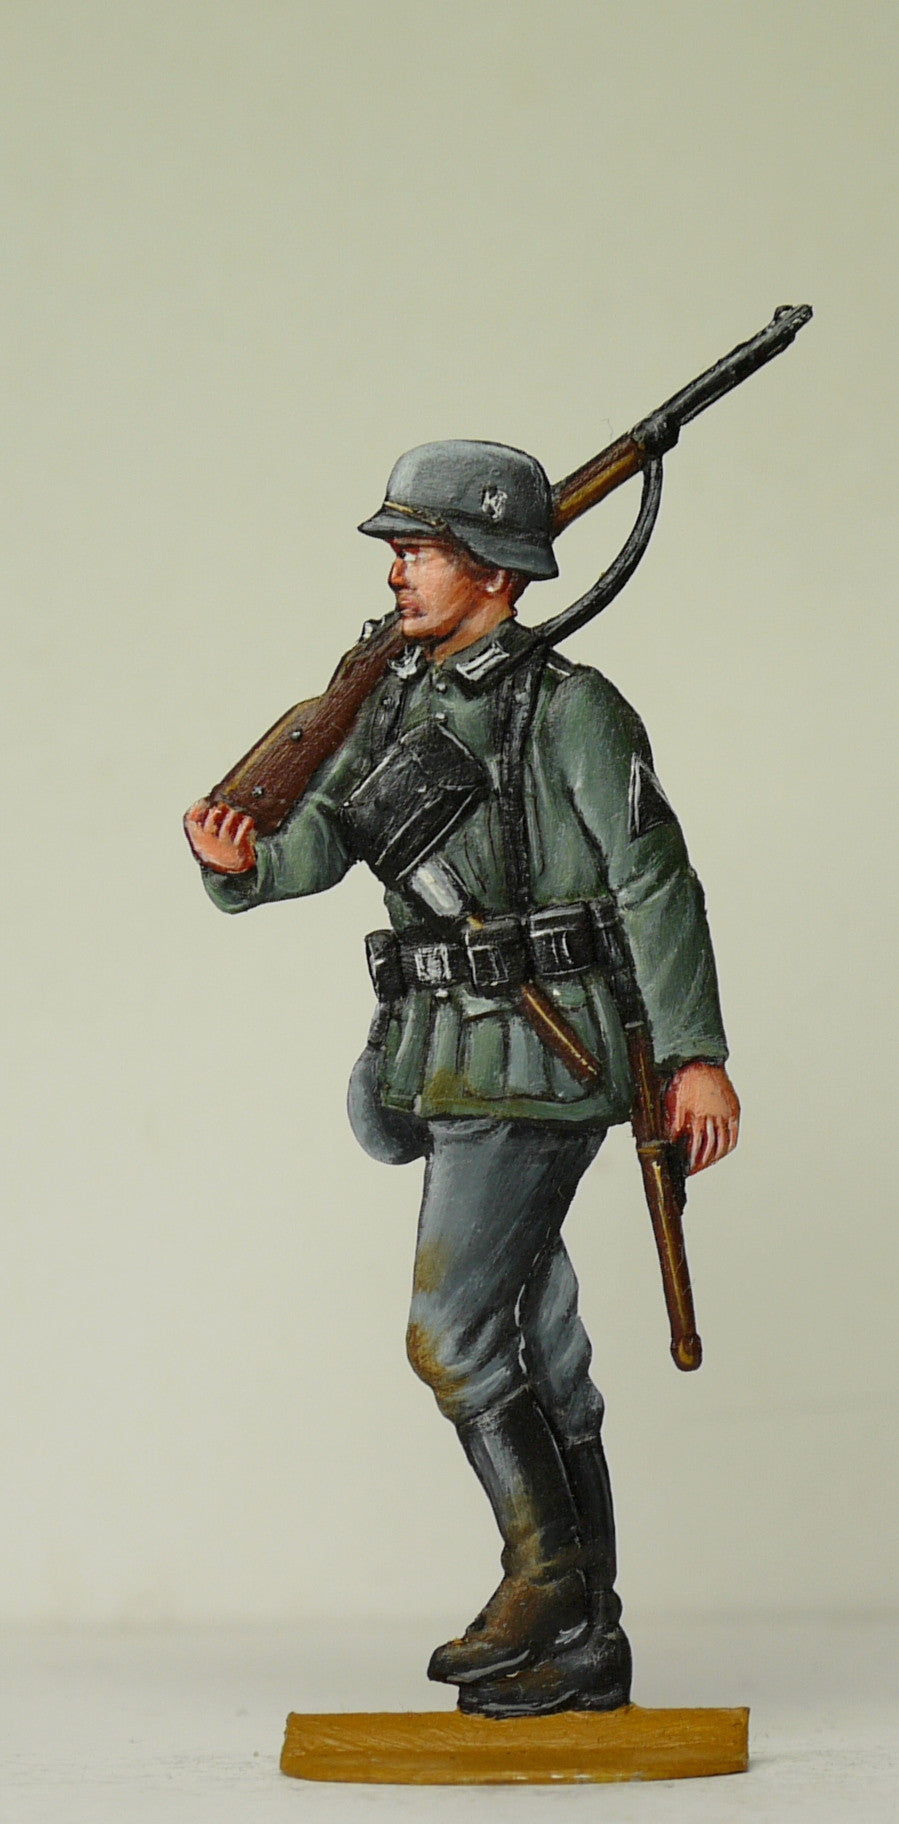 Soldier with carbine over schoulder - Glorious Empires-Historical Miniatures  